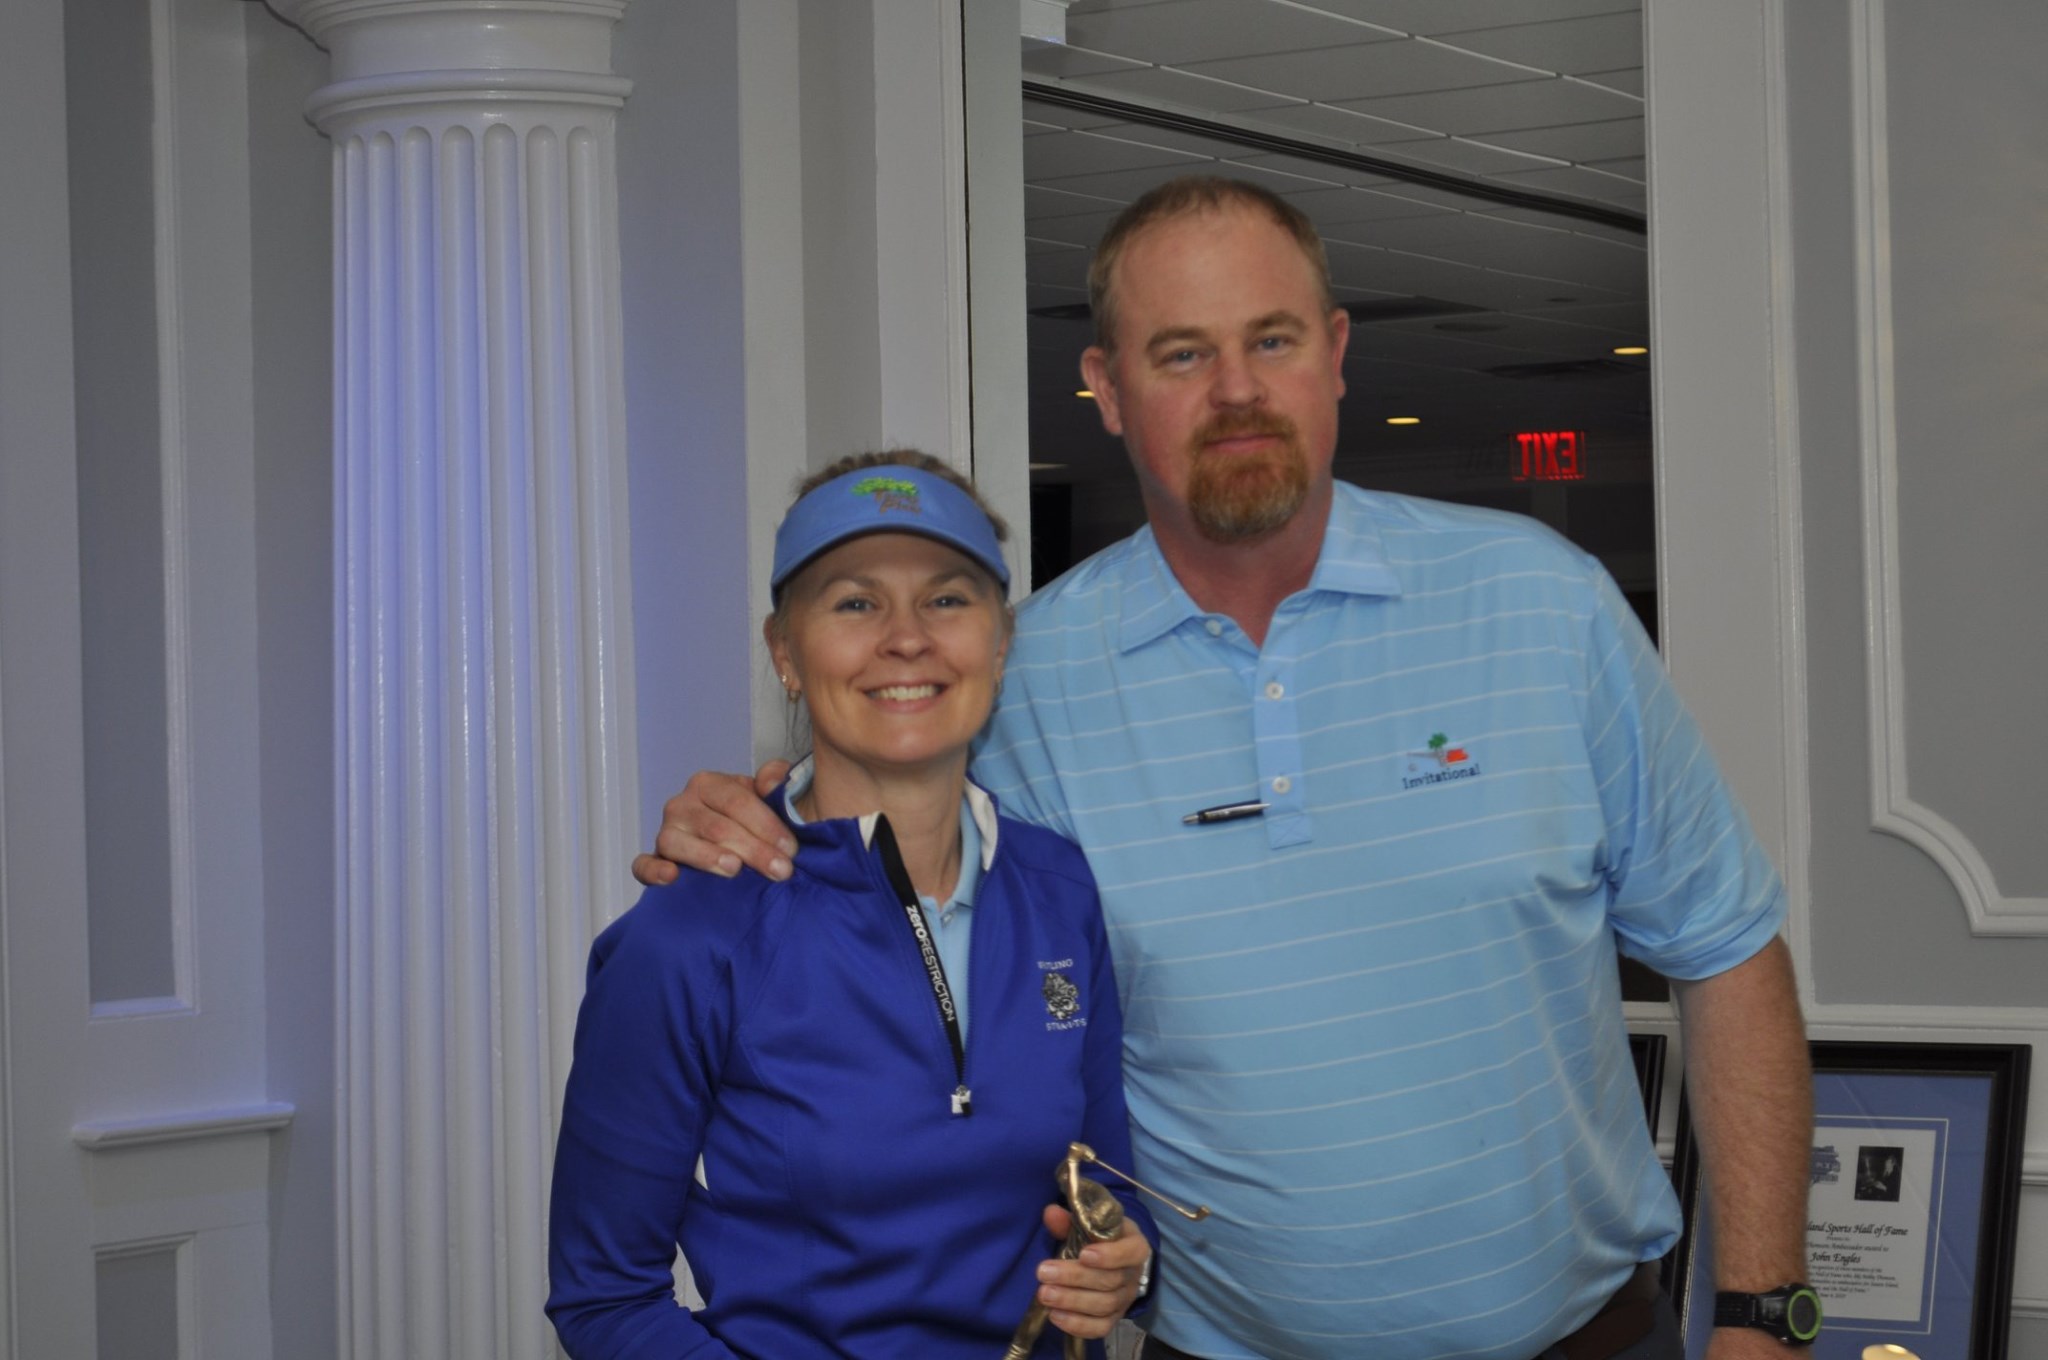 John Woodman Jr. with his sister, Suzzane, winner of the distaff longest drive competition.